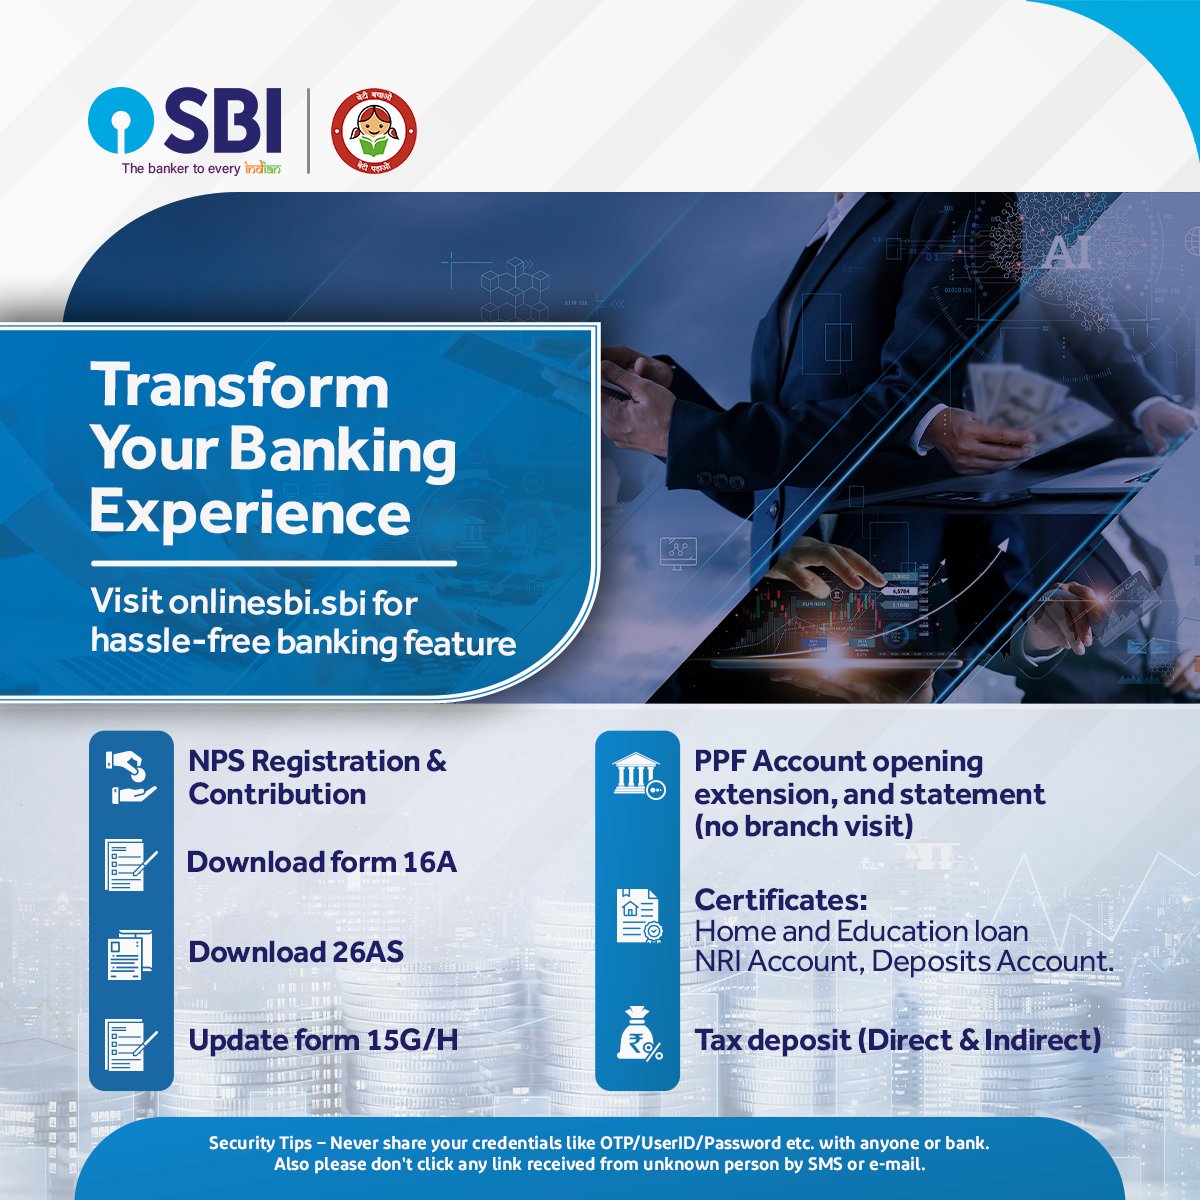 Elevate your Banking experience with State Bank of India's Internet Banking services at onlinesbi.sbi

#SBI #GoDigital #OnlineSBI #InternetBanking #GoDigitalWithSBI #DeshKaFan #TheBankerToEveryIndian